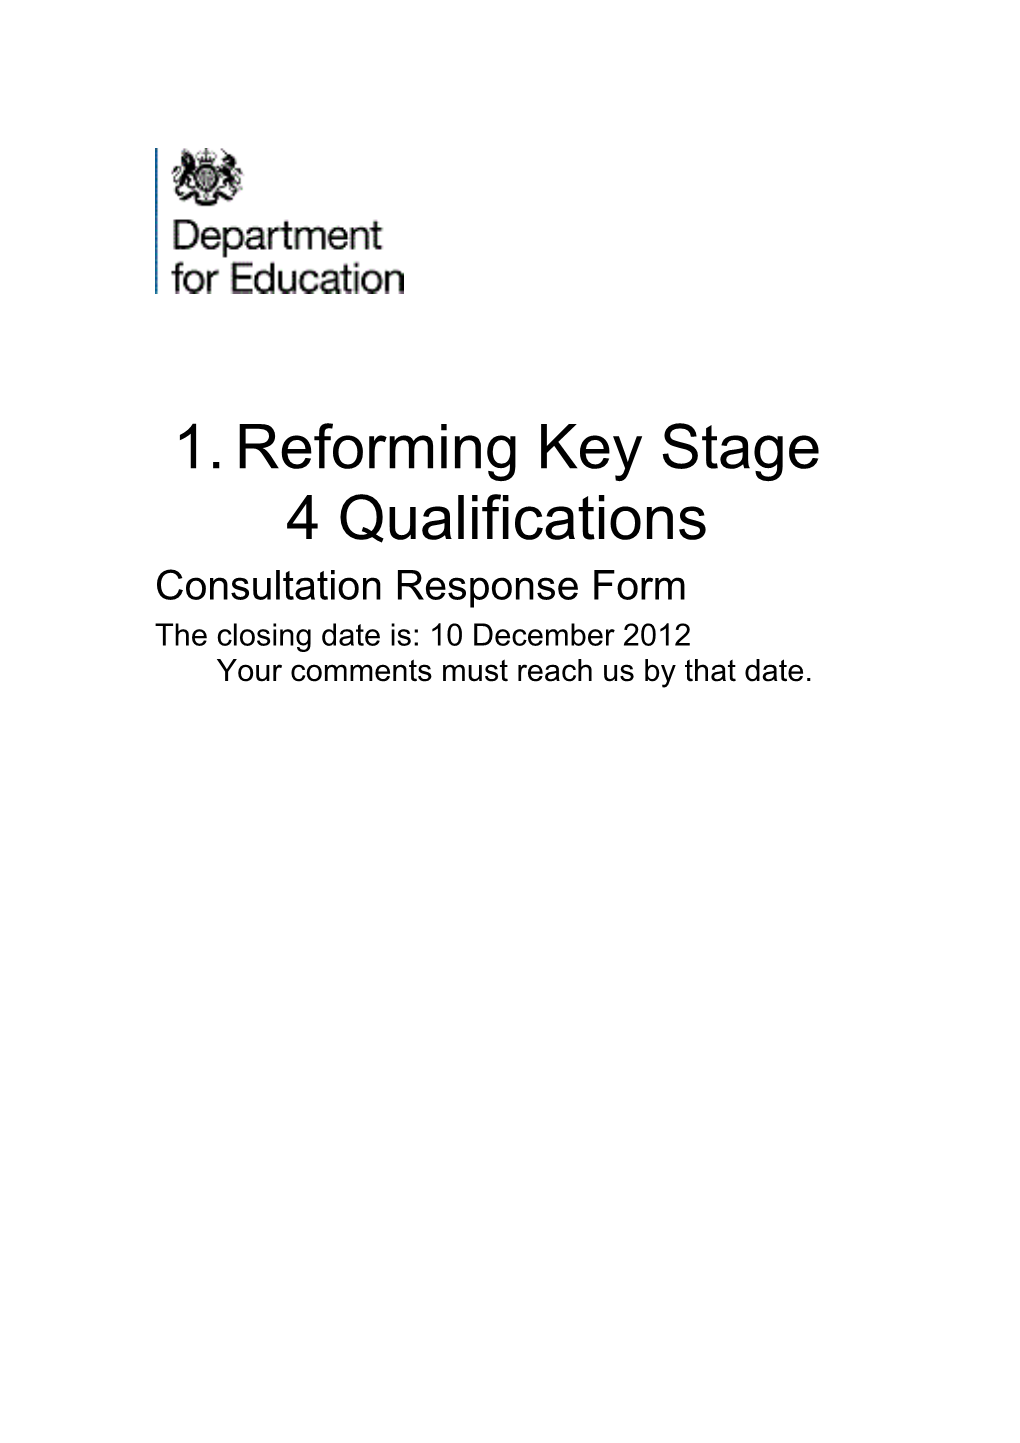 Reforming Key Stage 4 Qualifications